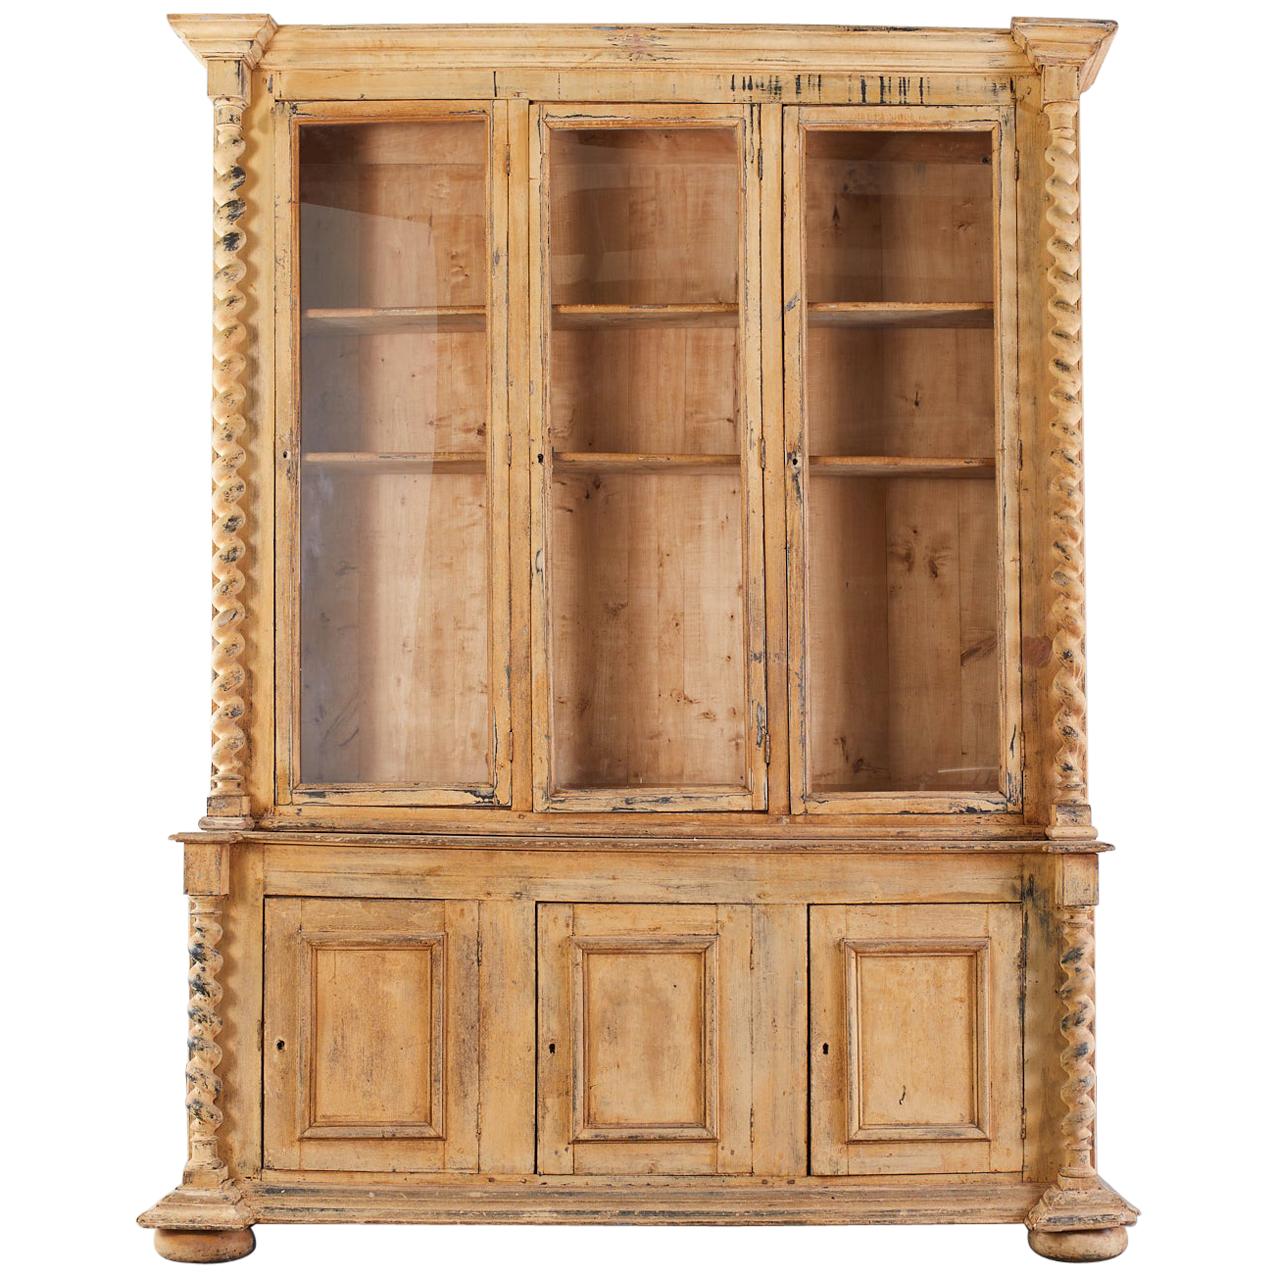 19th Century Country French Pine Barley Twist Bibliotheque Bookcase